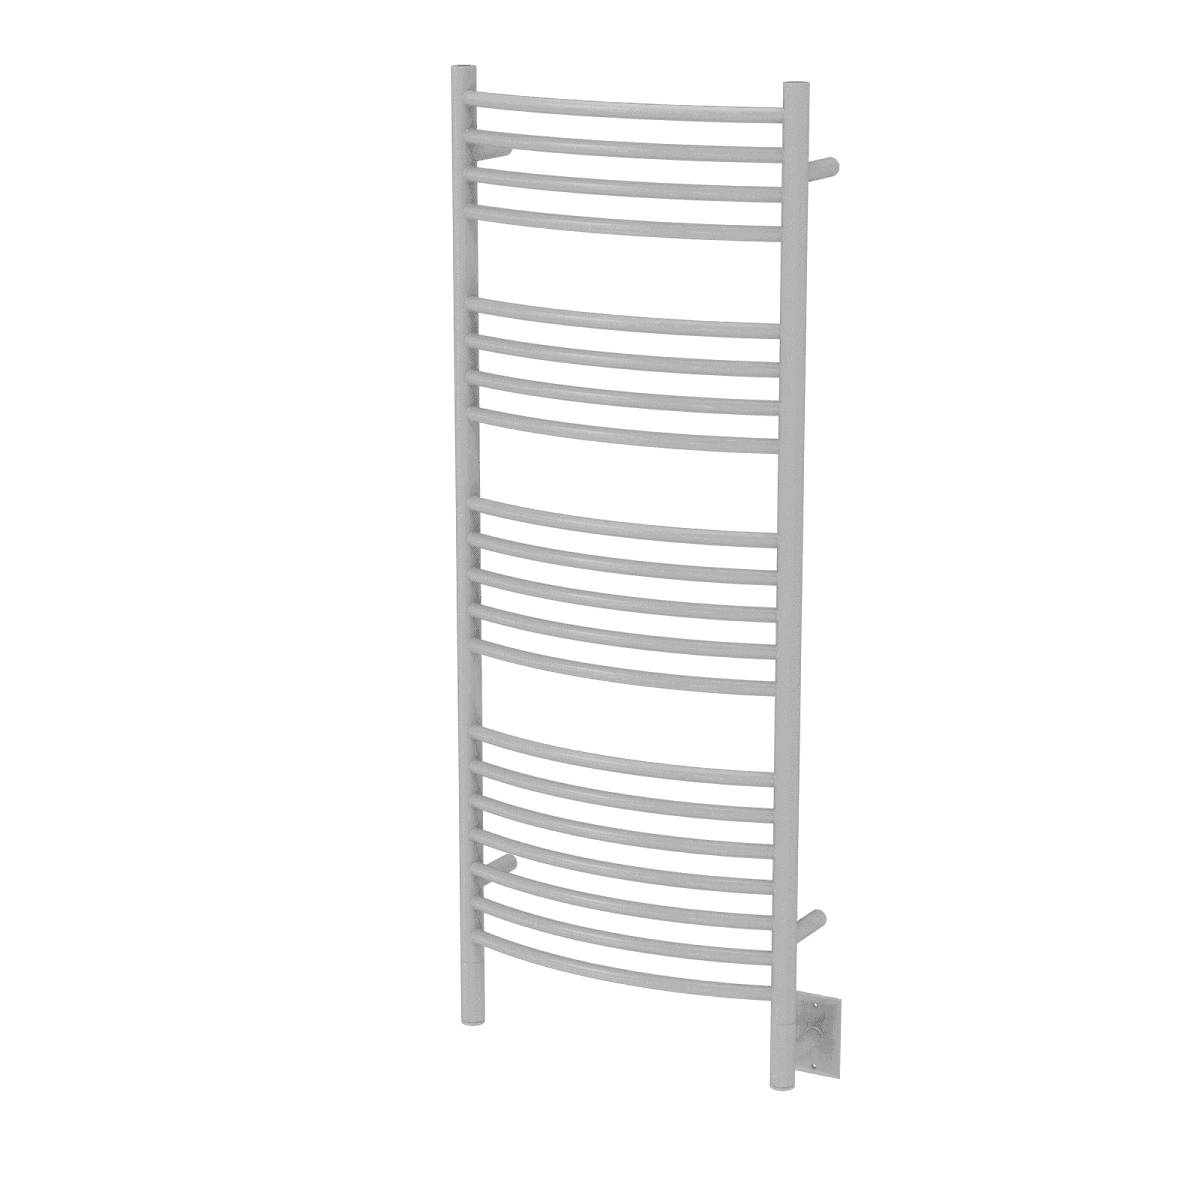 Amba DCW Model D Curved 20 Bar Hardwired Towel Warmer - White